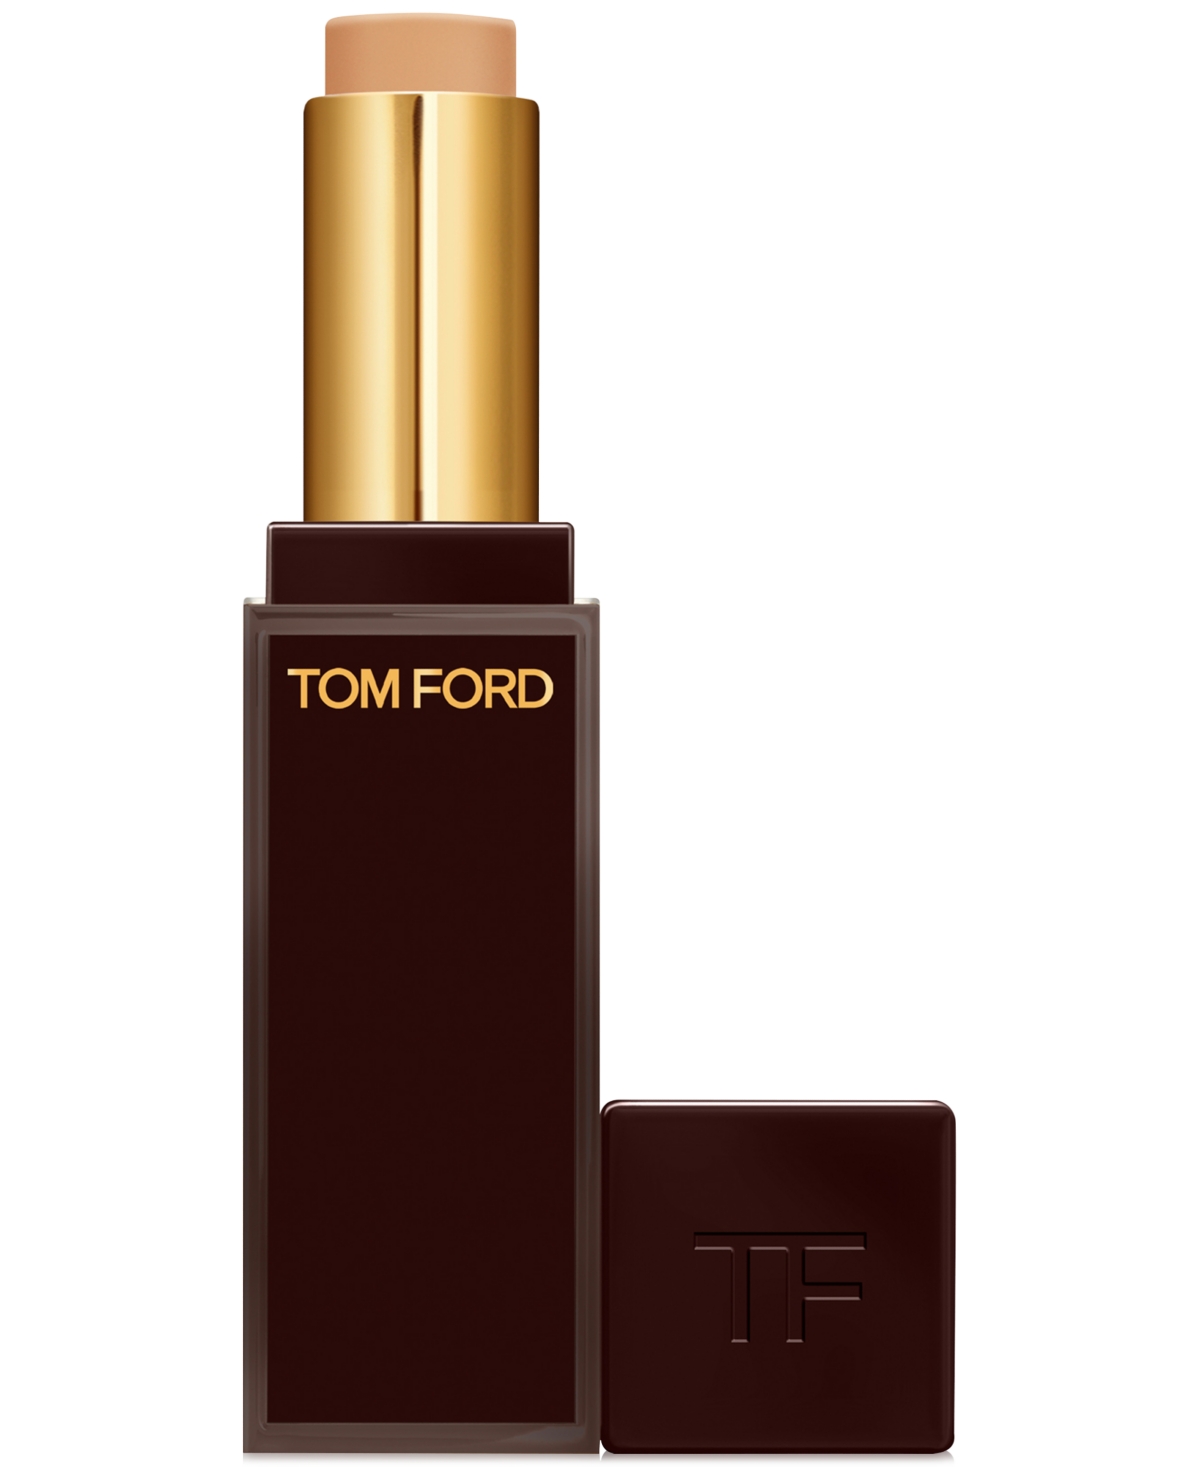 Tom Ford Traceless Soft Matte Concealer In W Tan (tan Skin With Olive Undertones)